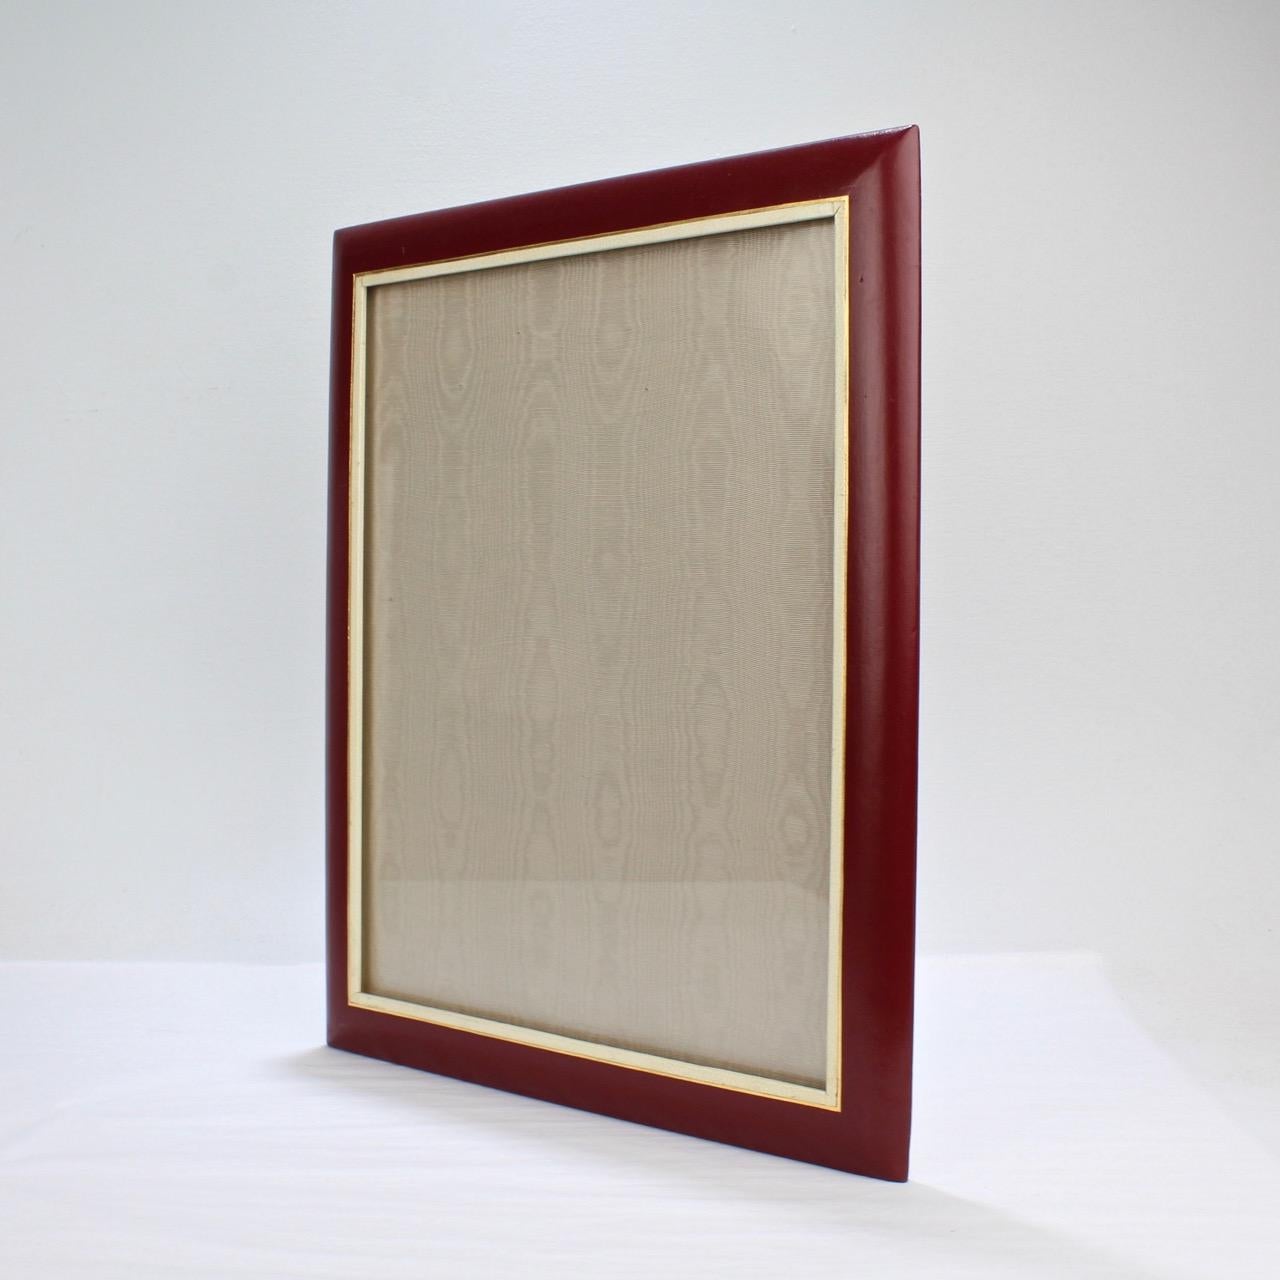 A fine Italian midcentury picture frame.

With a burgundy border, white and gold color interior border, and an easel back.

Perfect for the large format photo!

The reverse marked: Cross Italy leather.

Measures: Height ca. 16 in
Width ca.